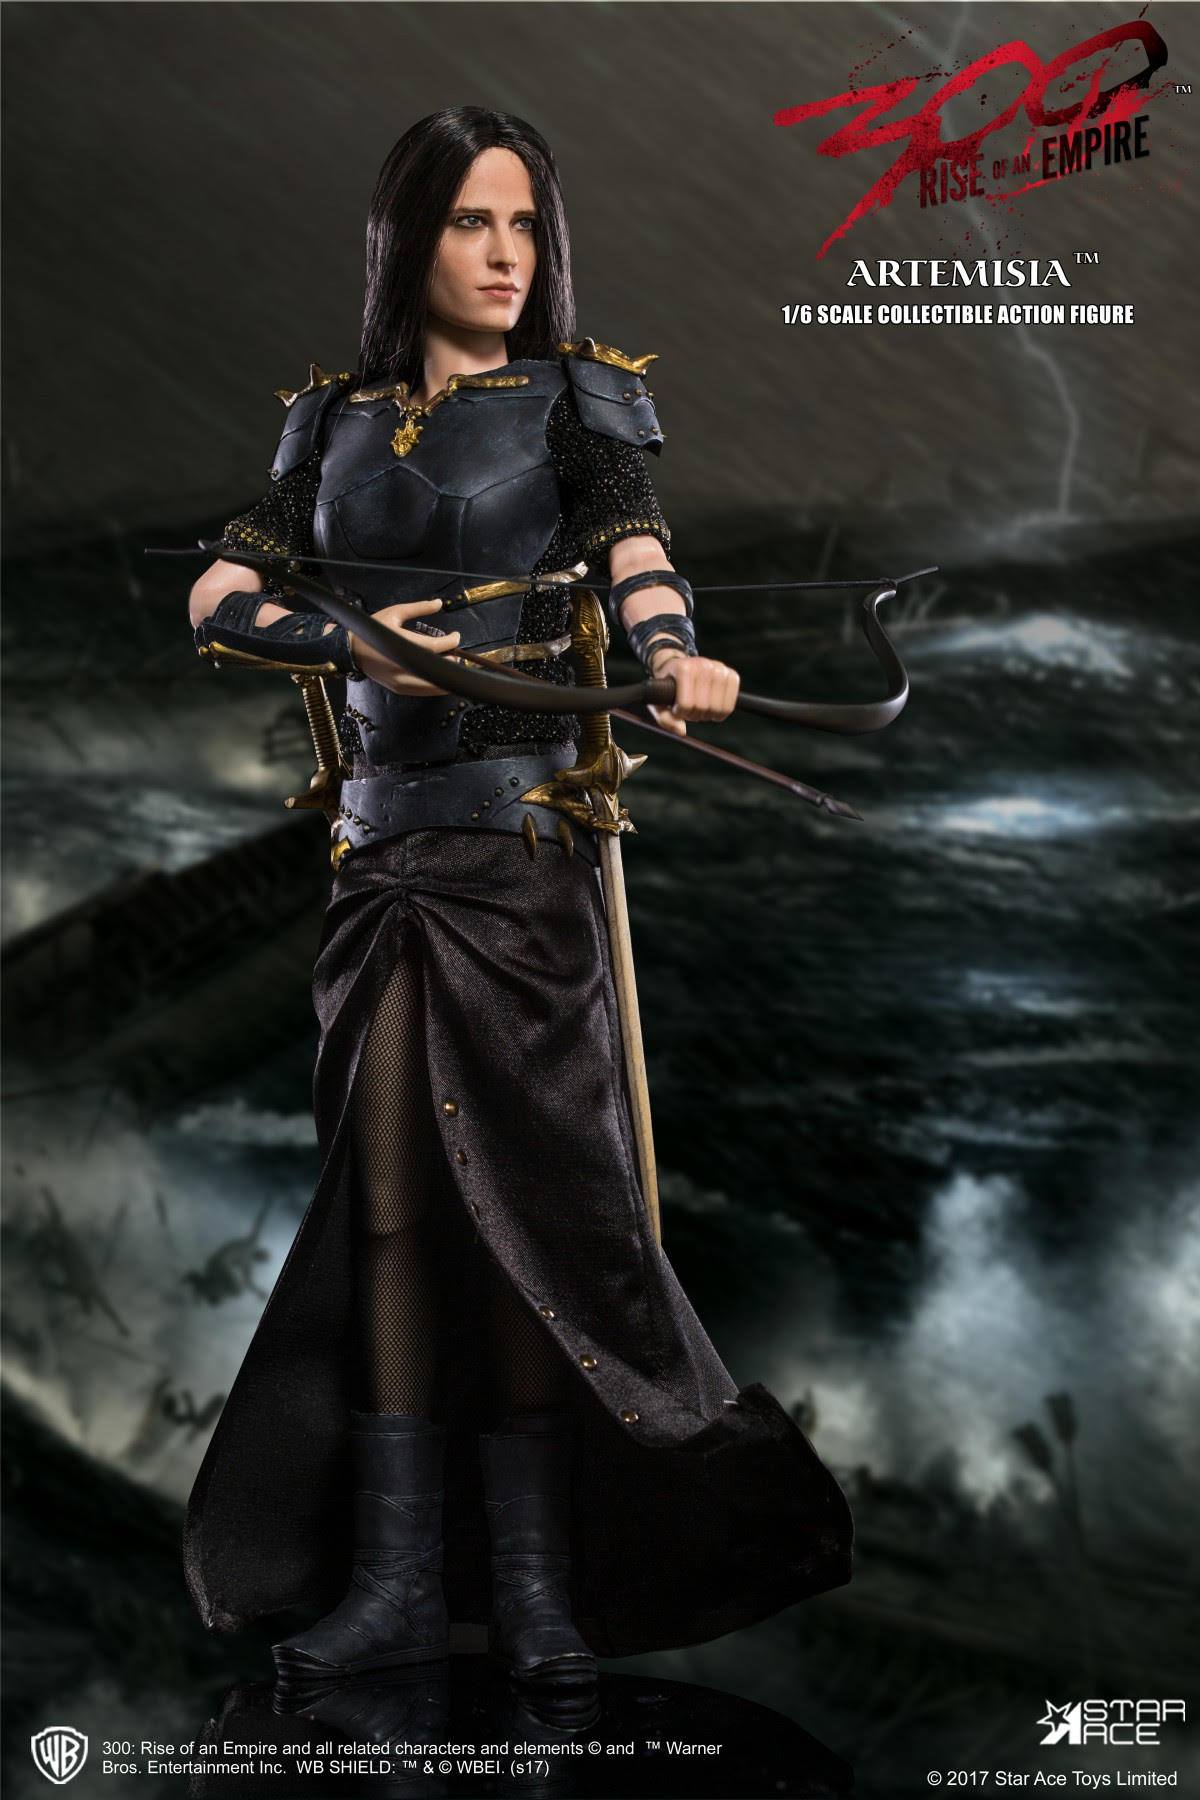 Star Ace Toys - 300: Rise of an Ampire - General Artemisia - Marvelous Toys